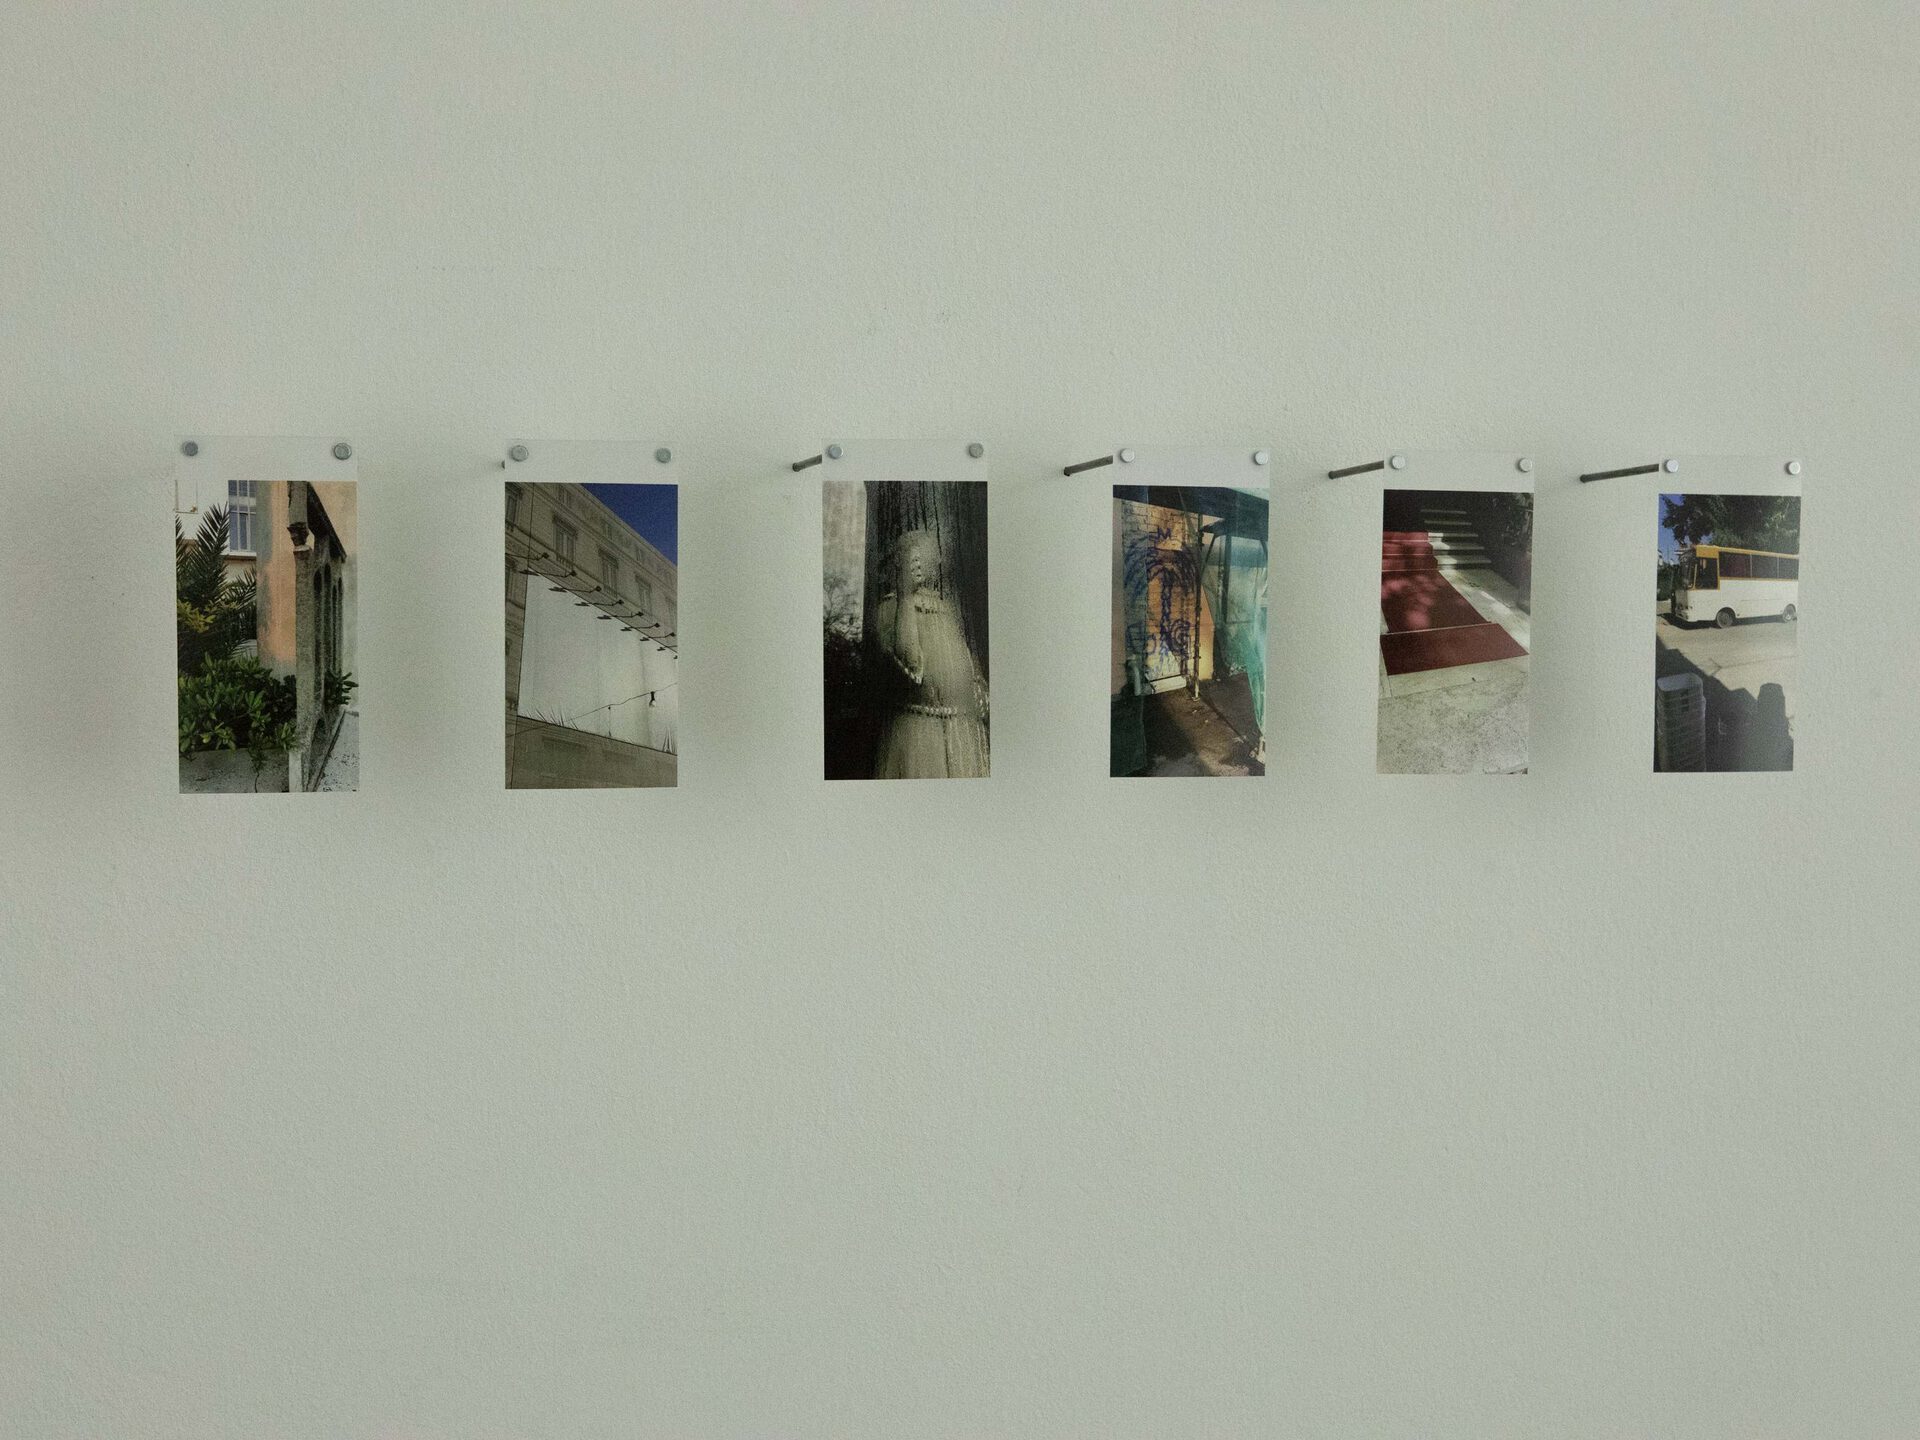 Isabell Alexandra Meldner, Elsewhere, From Behind the Glass, 2021, Series of 6 C-Prints, 10,5x6cm each